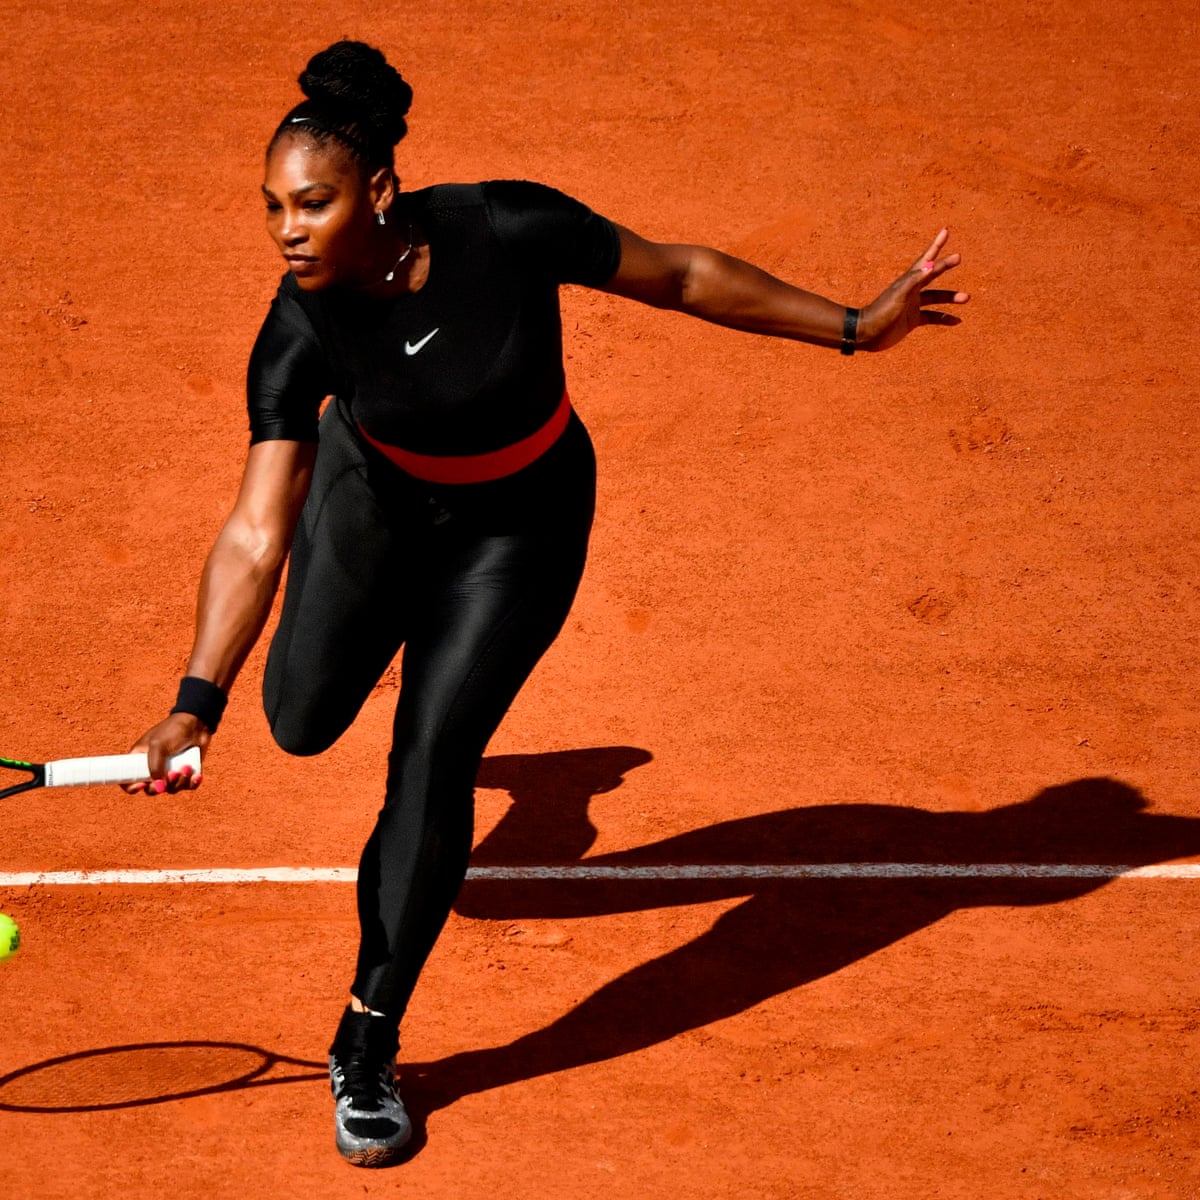 What the ban on Serena Williams' catsuit says about the sexualising of black women's bodies | Serena Williams | The Guardian